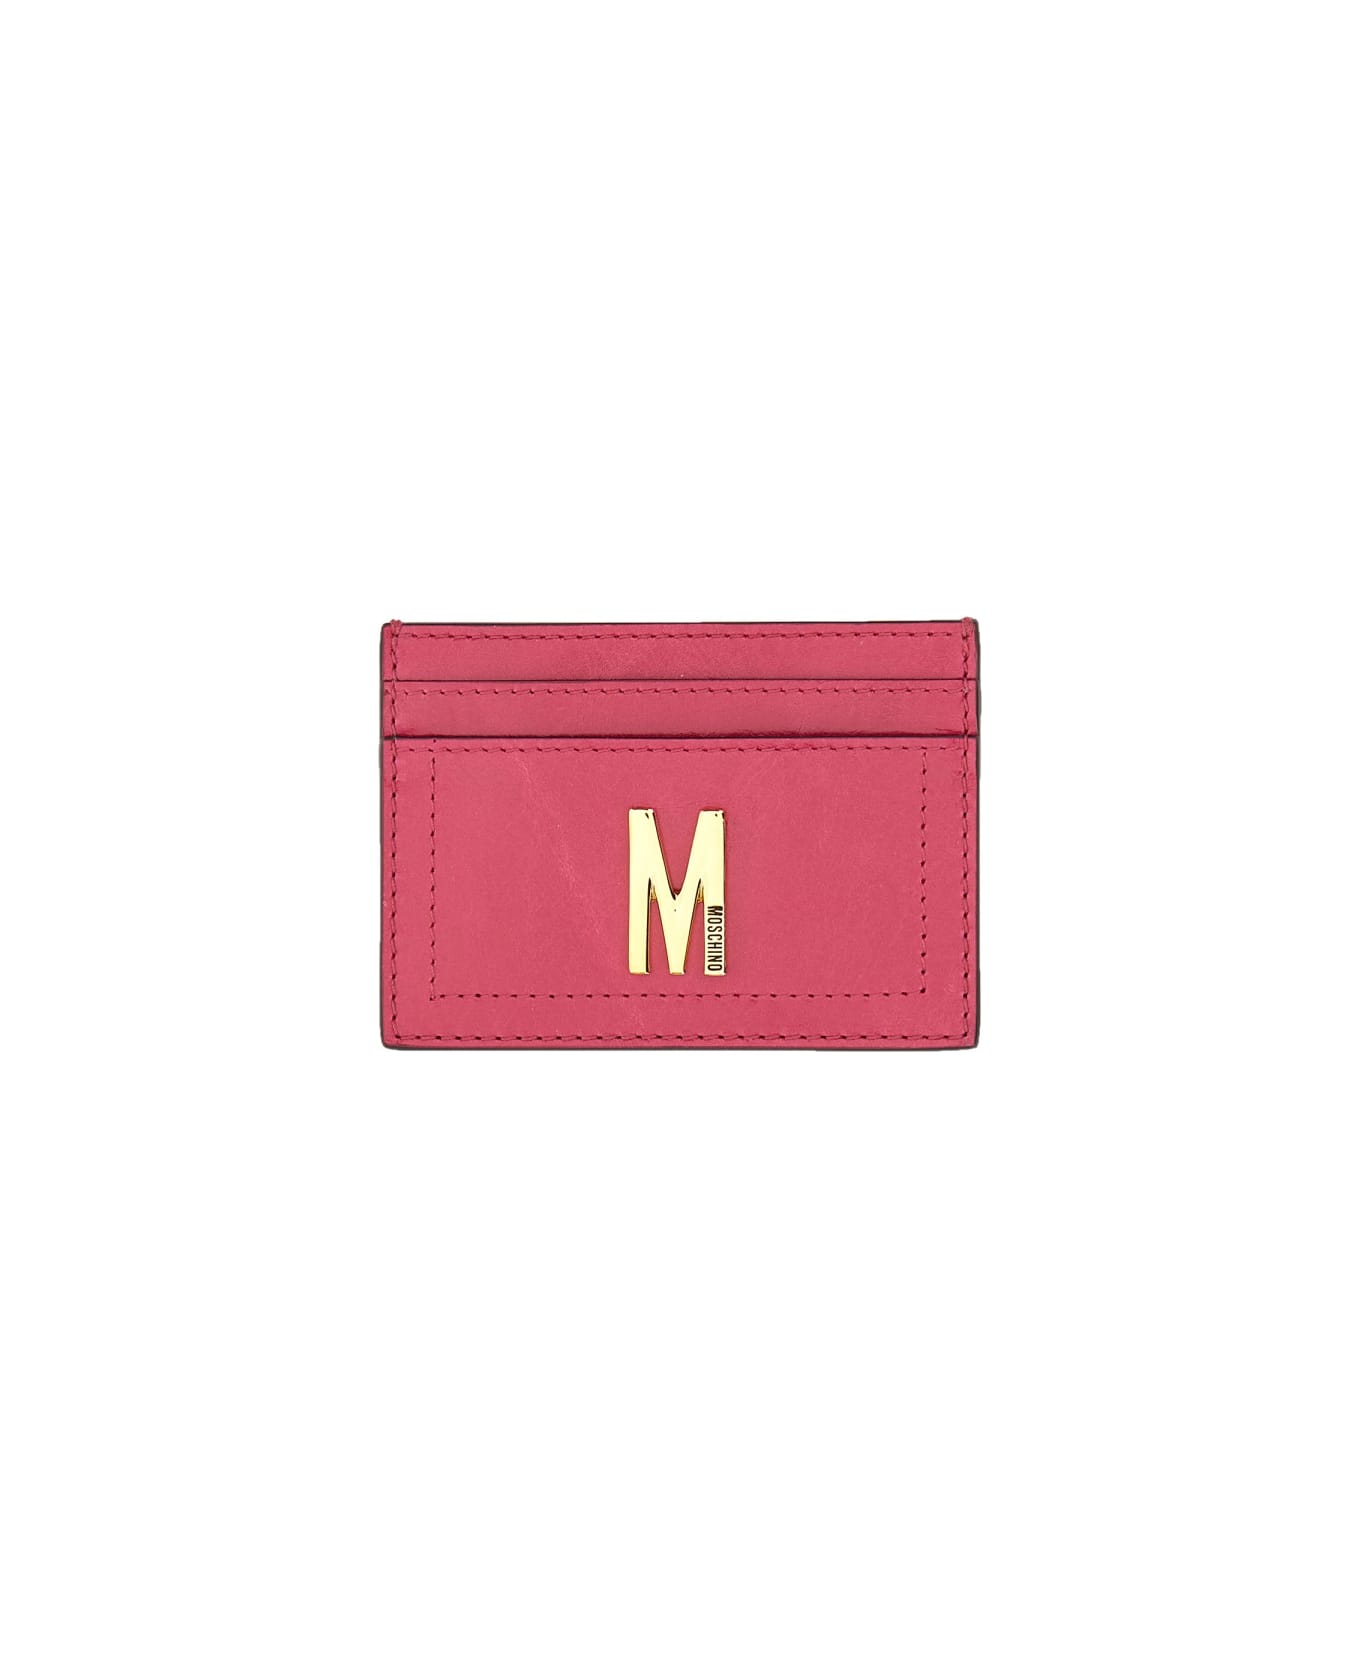 Moschino Card Holder With Gold Plaque - BORDEAUX 財布